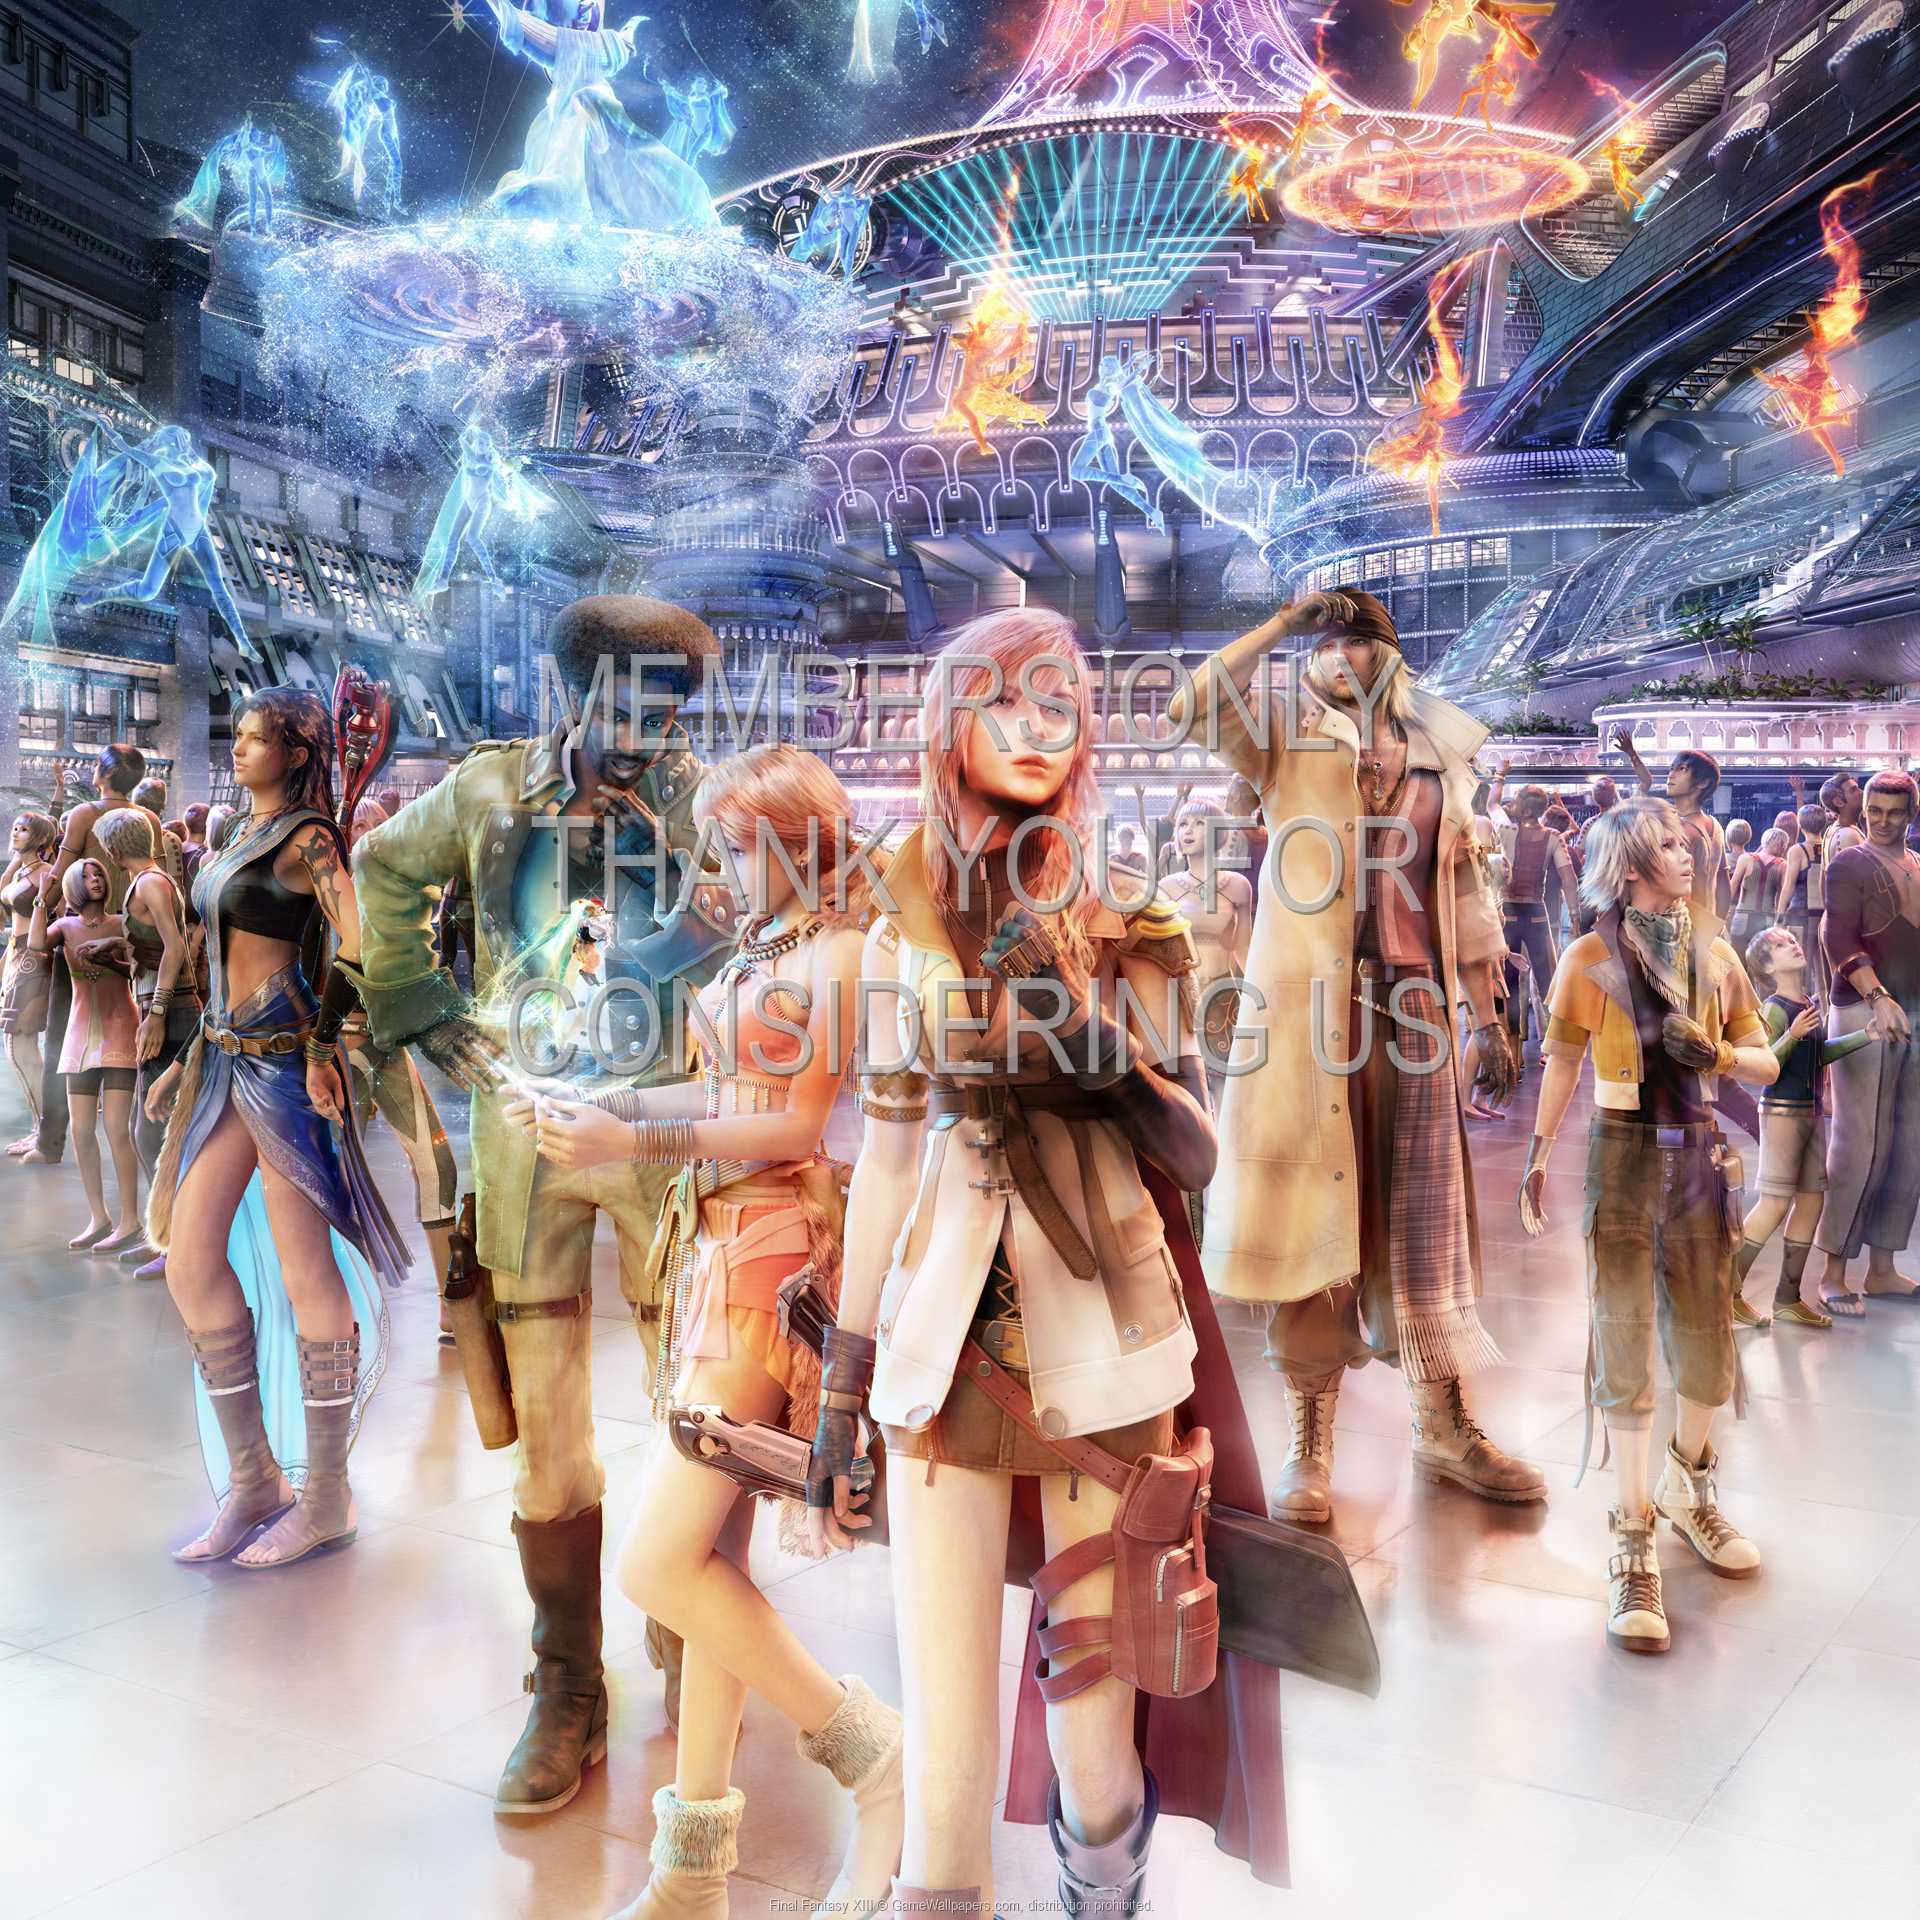 Final Fantasy XIII 1080p Horizontal Mobile wallpaper or background 11